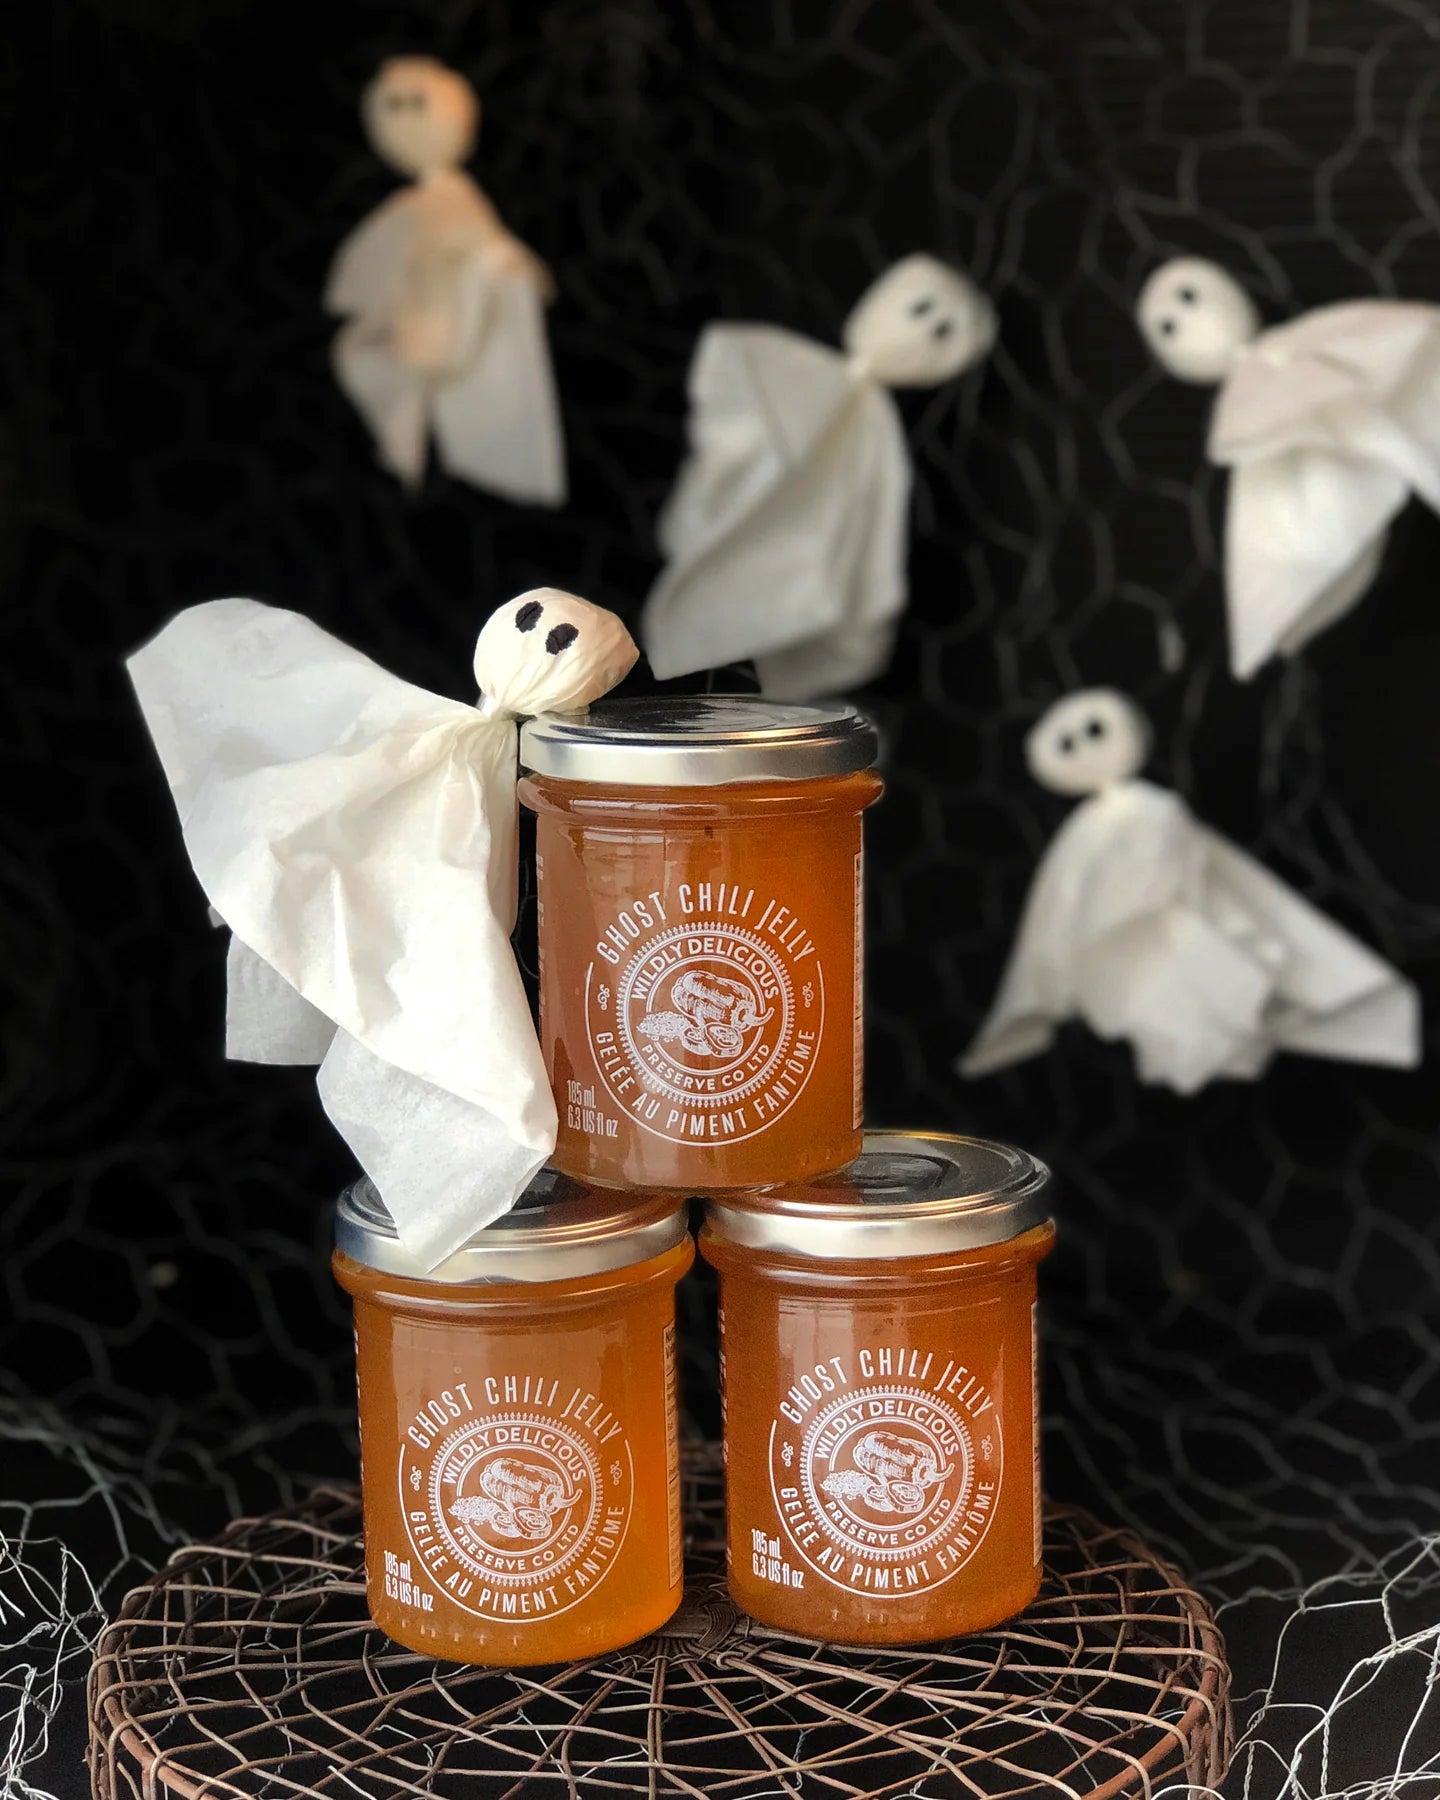 Ghost Chili Jelly